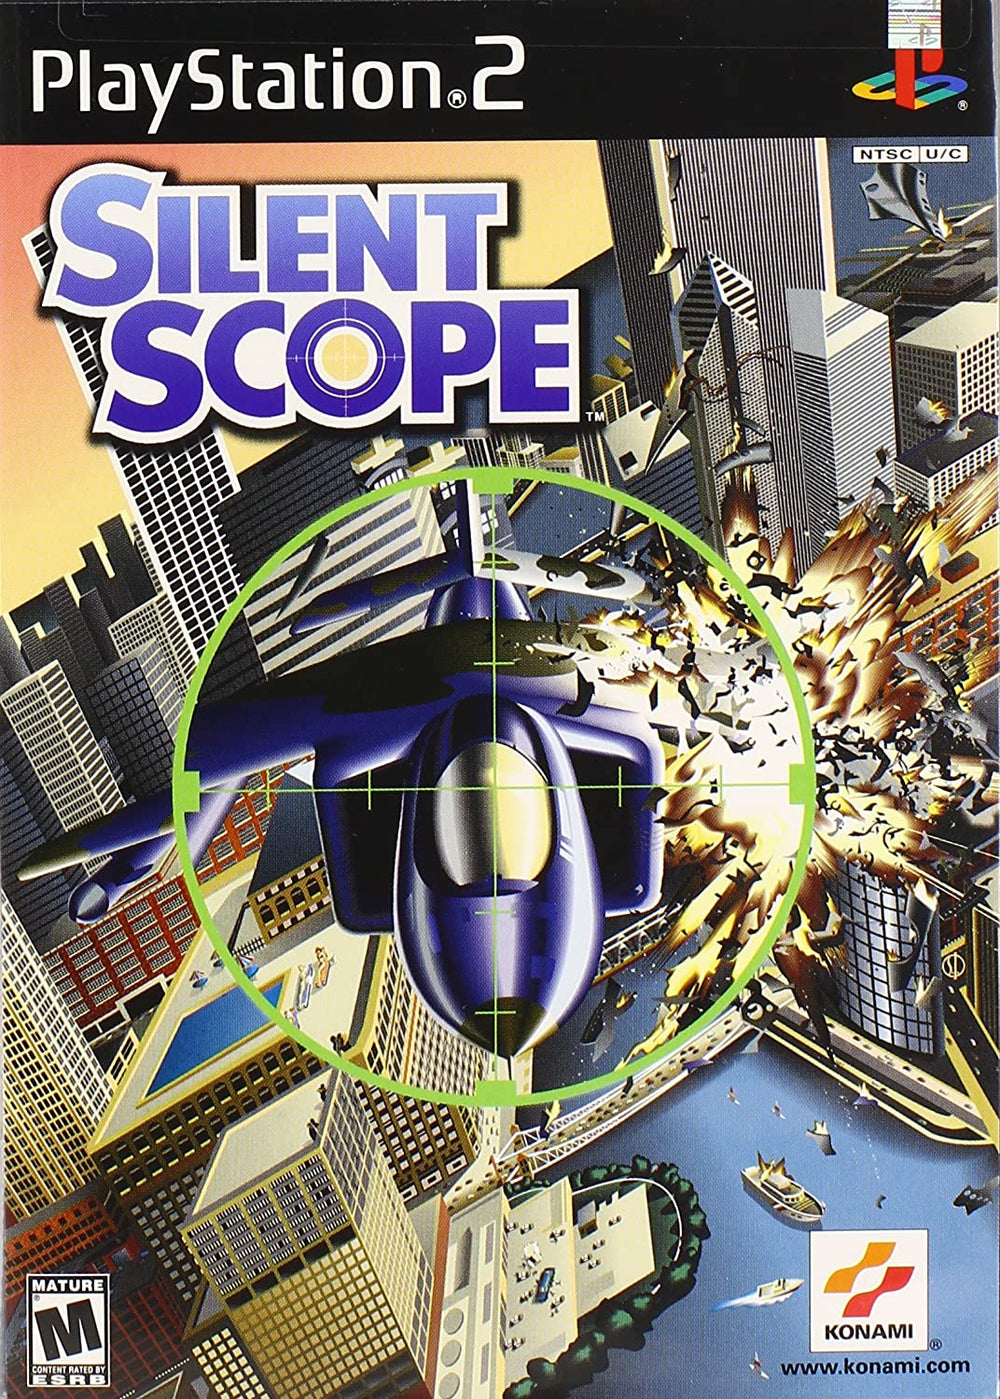 Playstation 2 - Silent Scope